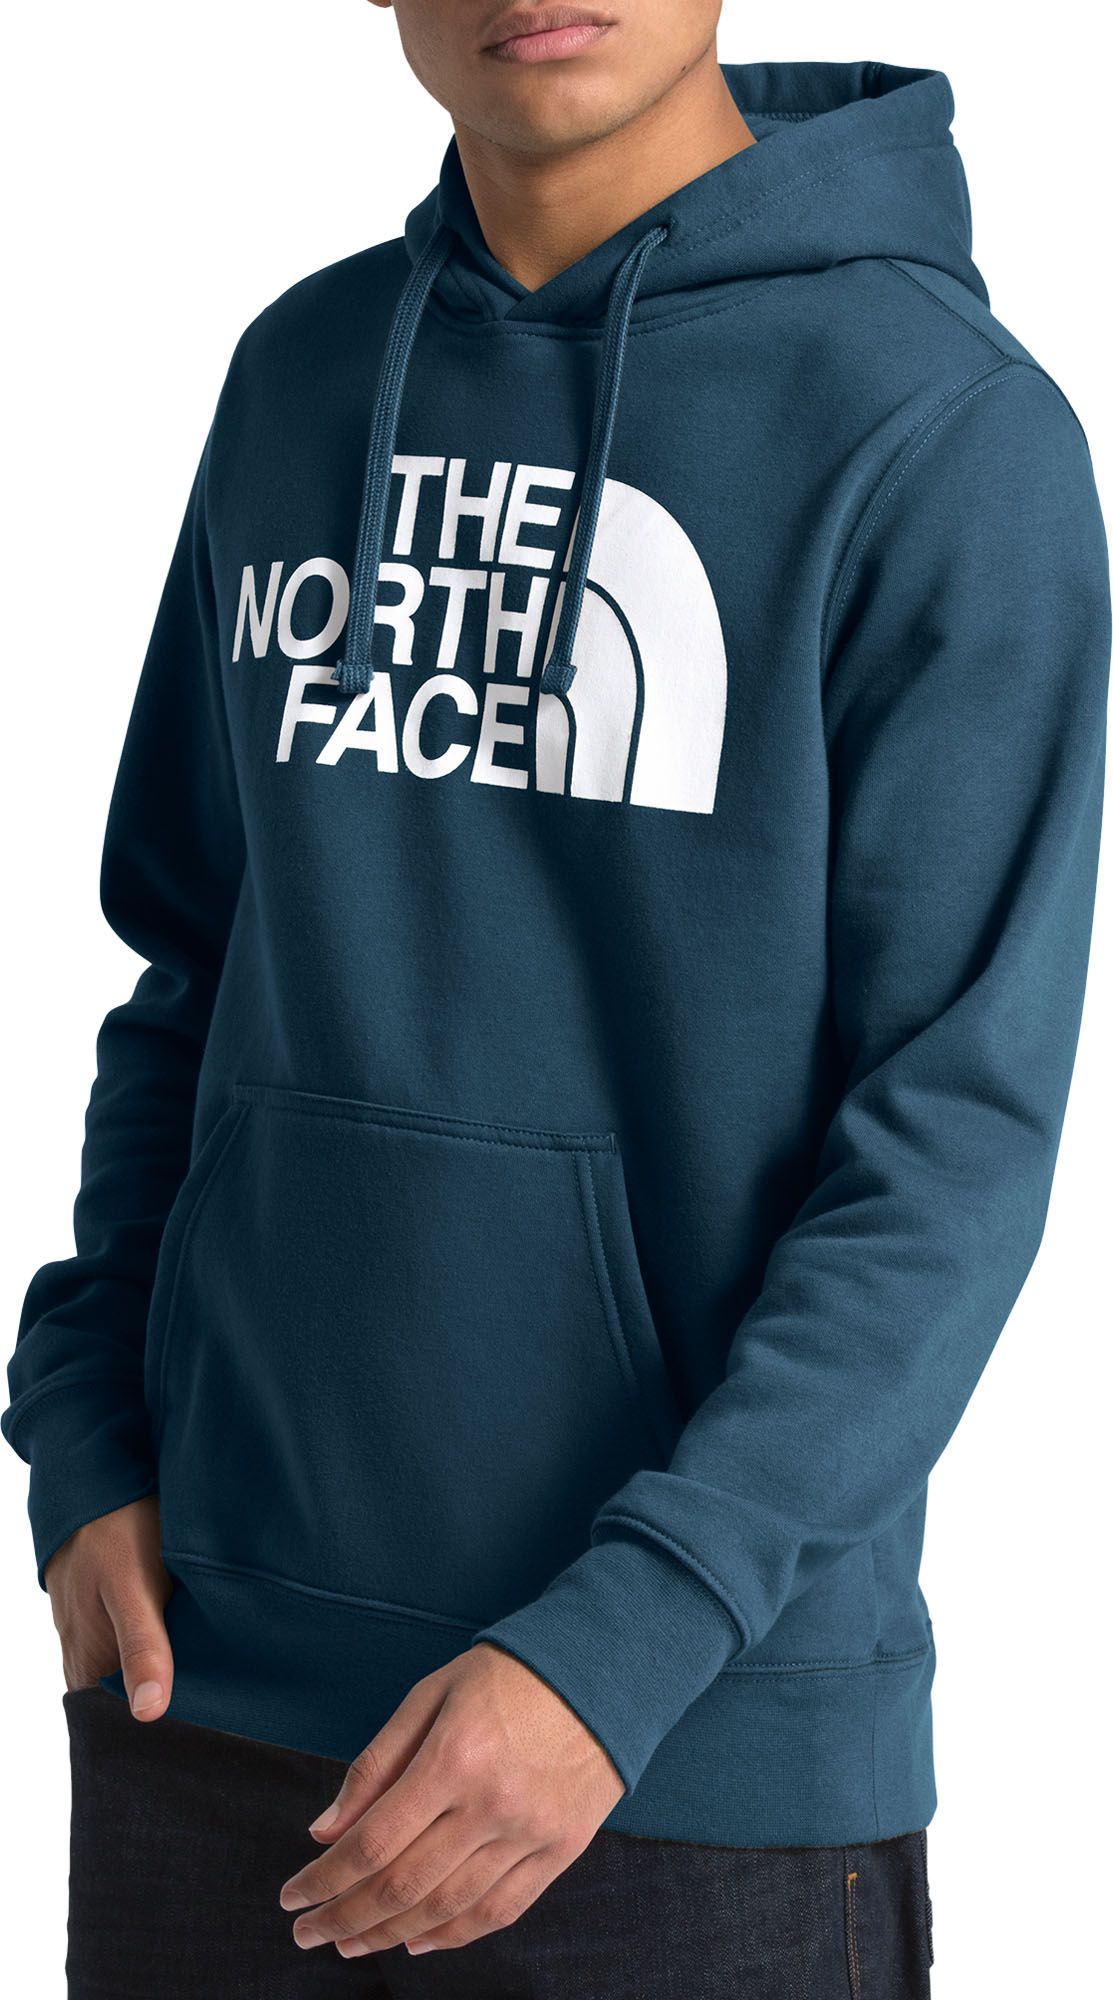 The North Face Men's Half Dome Fashion Hoodie - .00